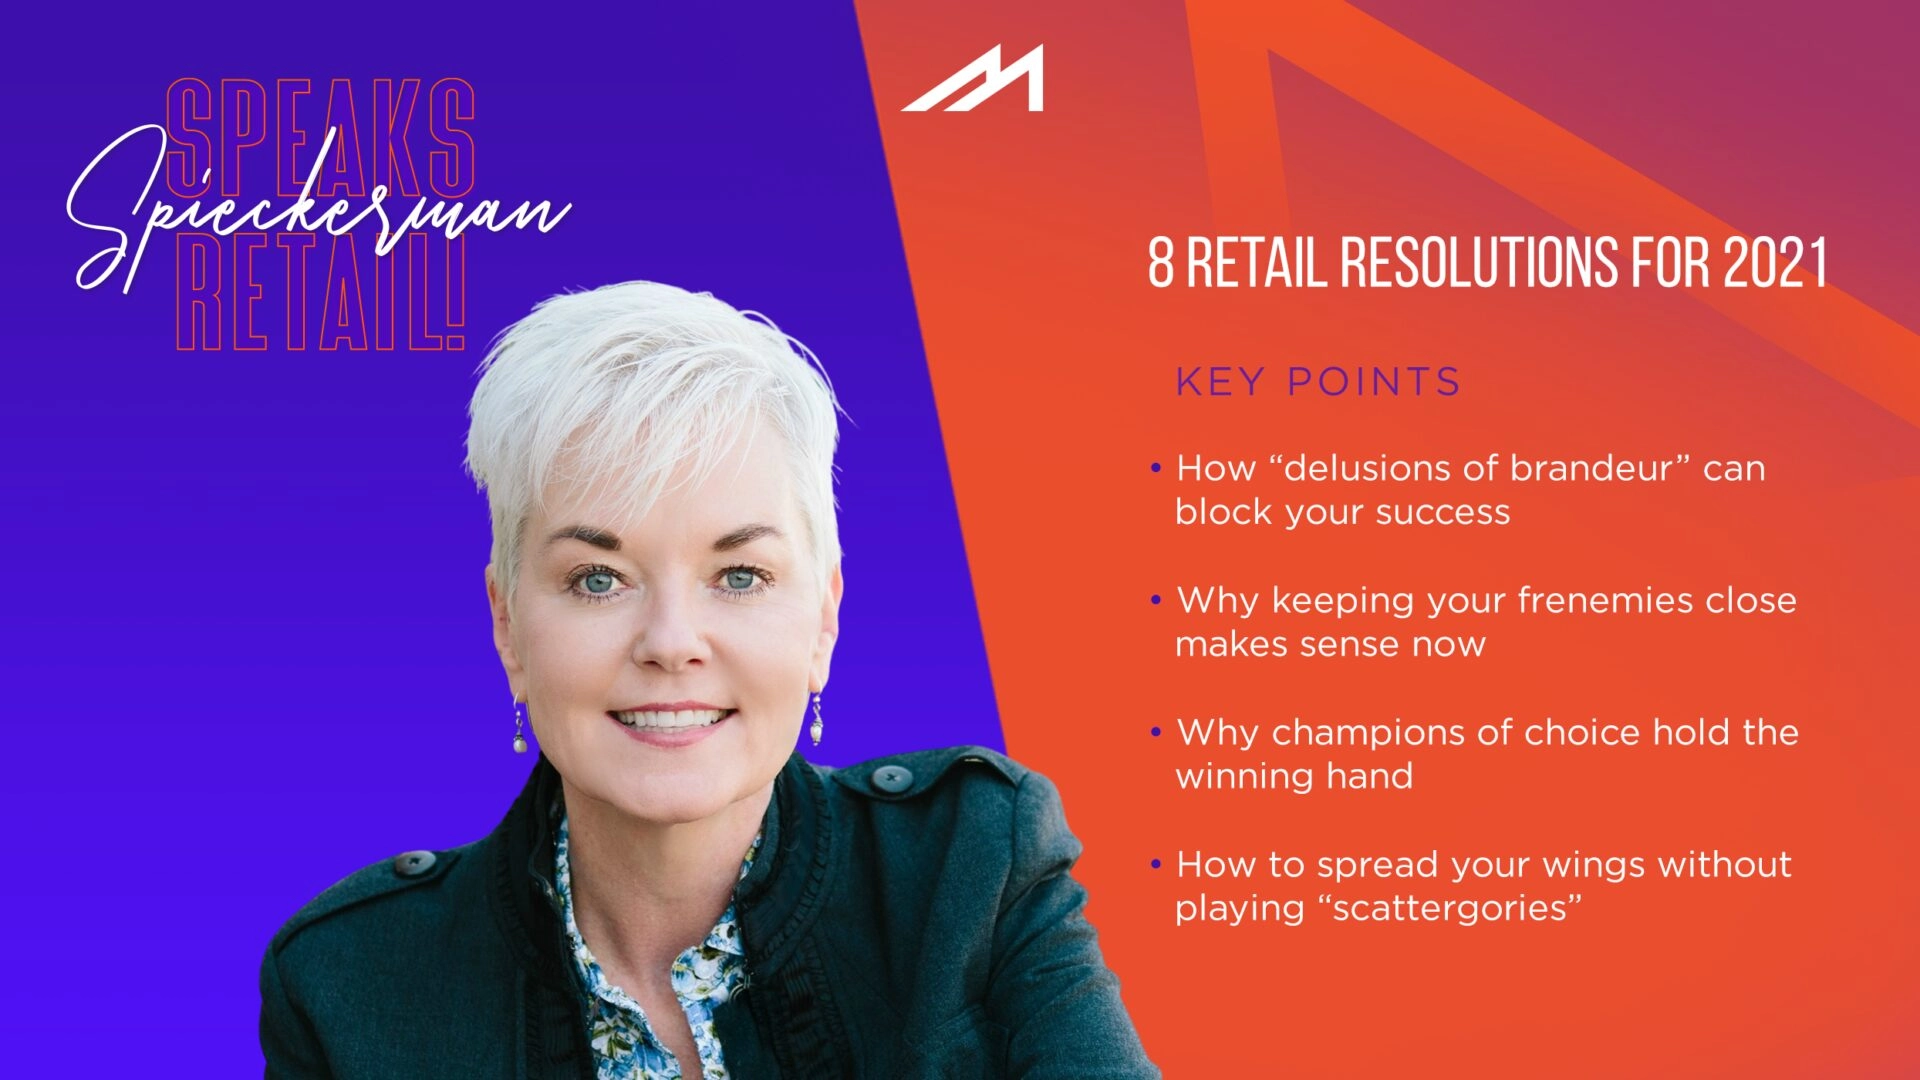 8 Retail Resolutions for 2021